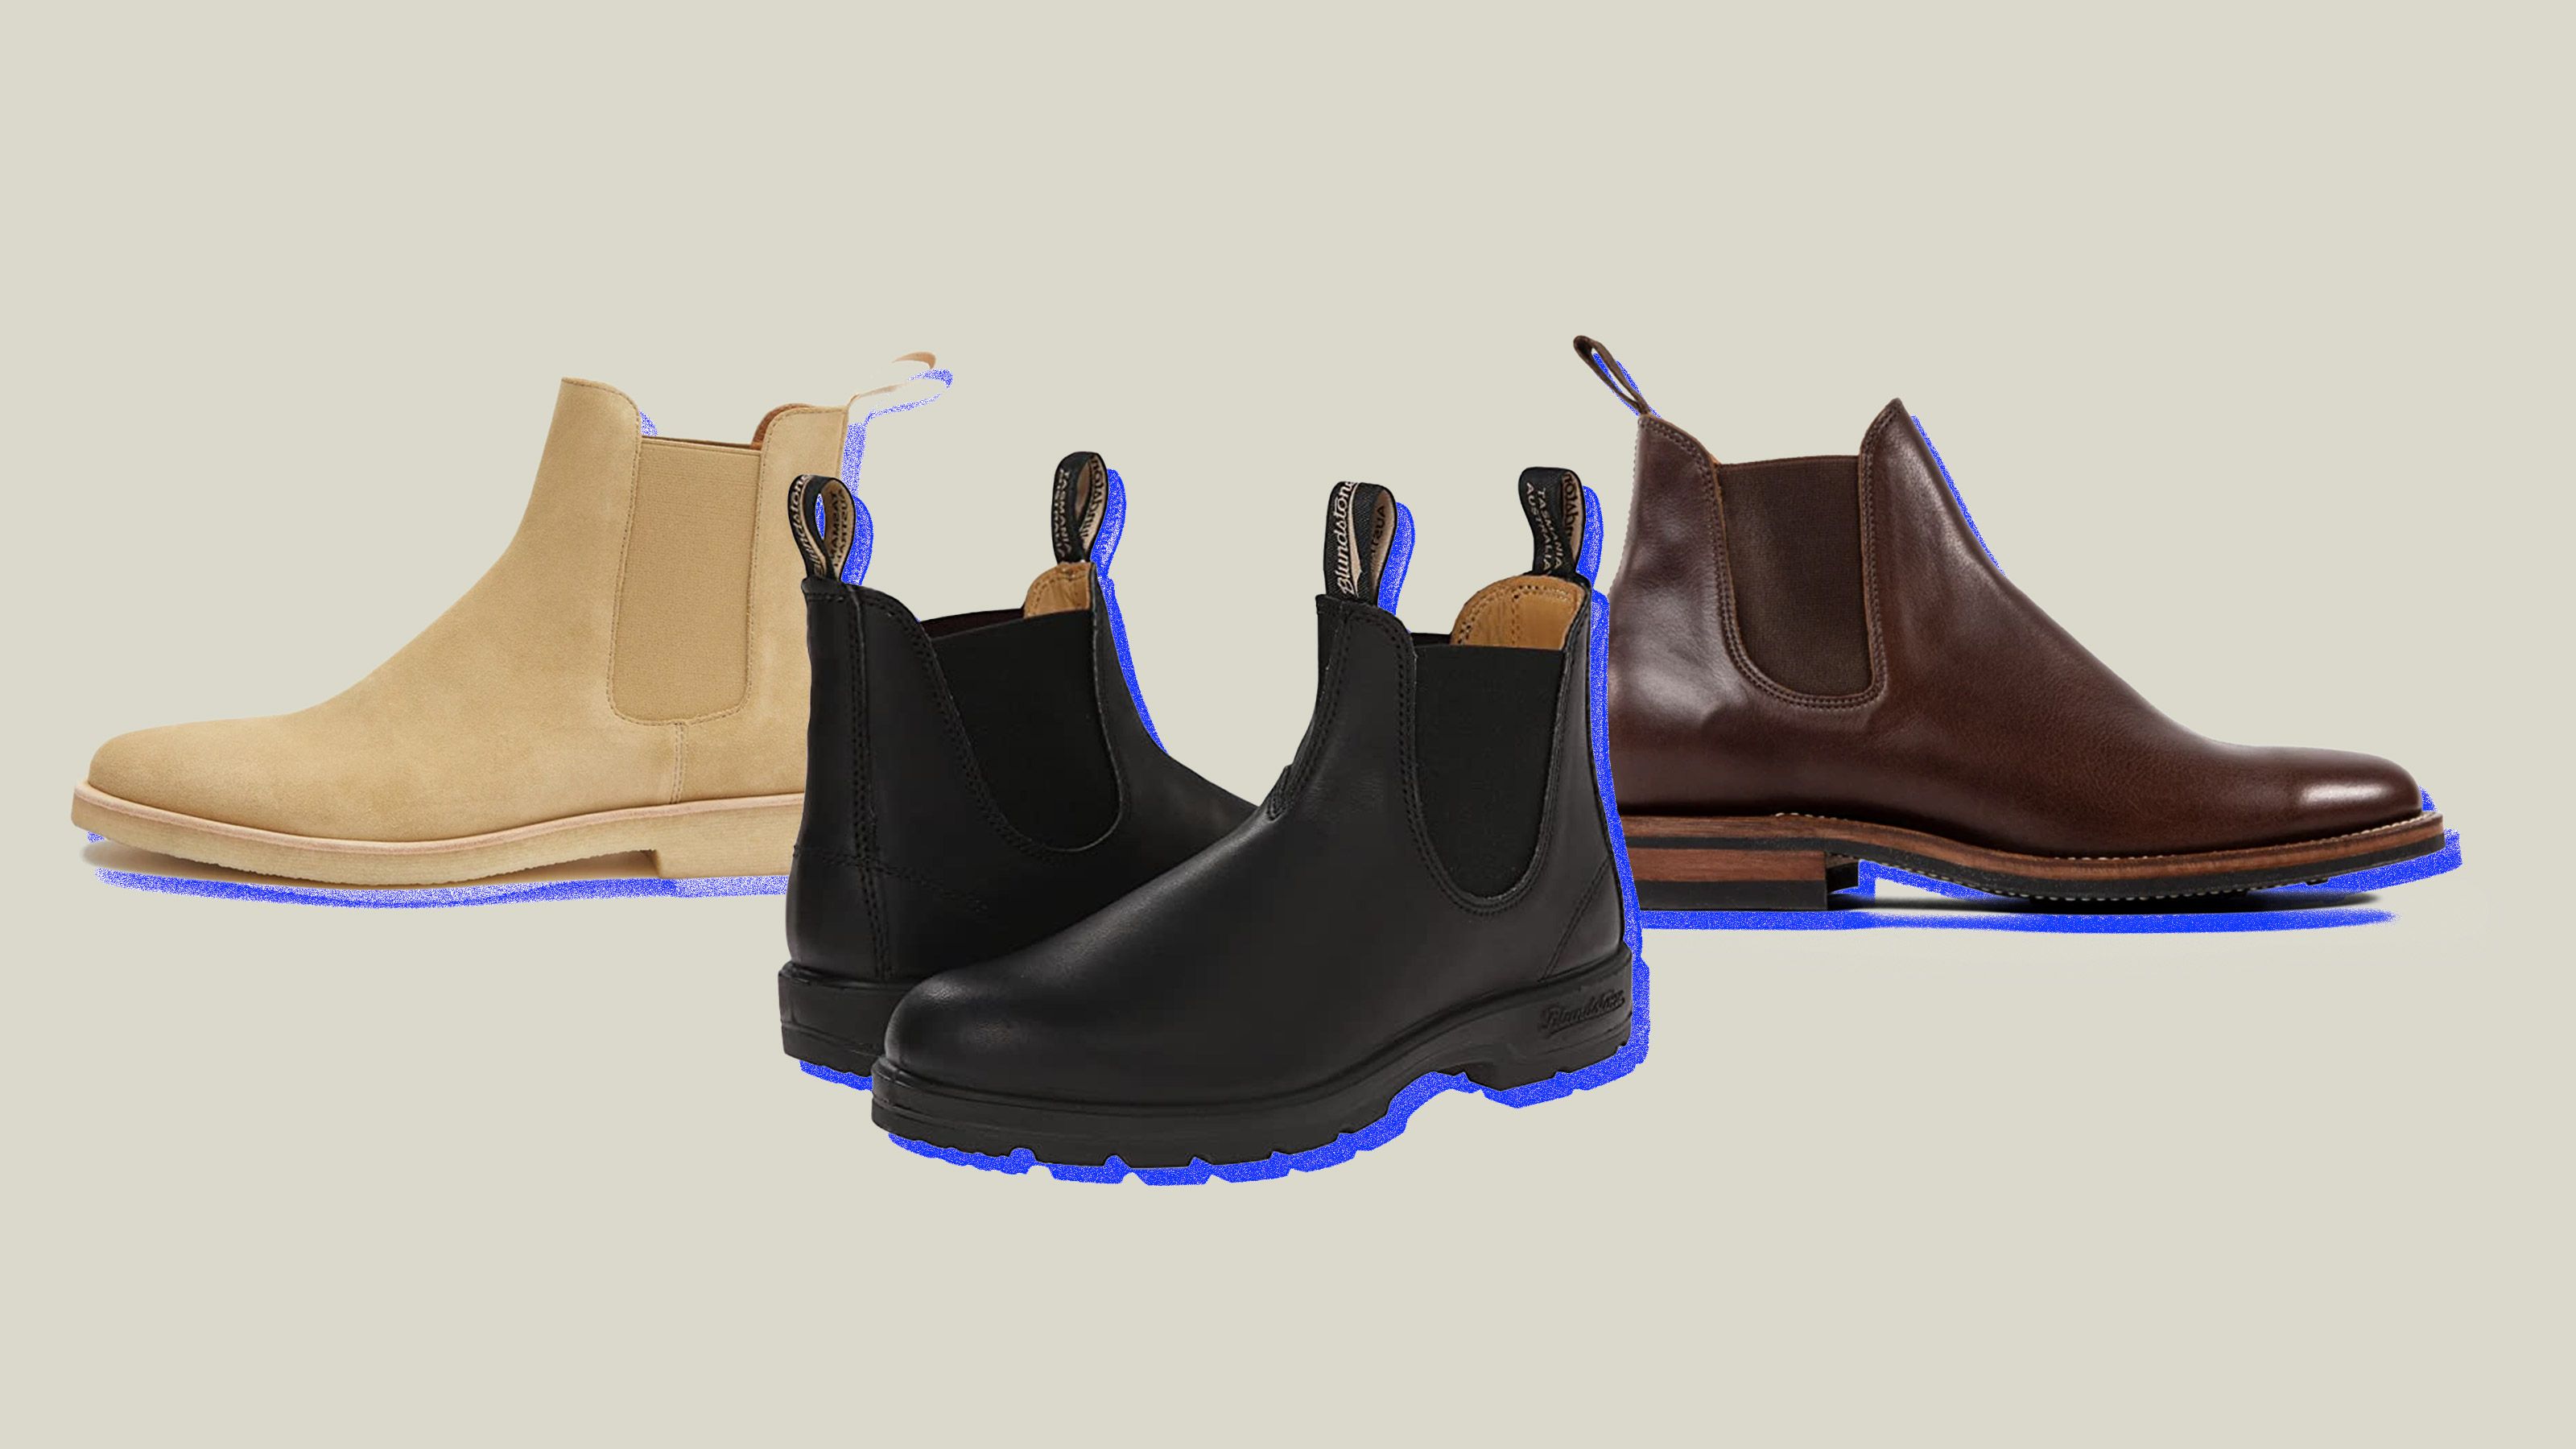 How to Wear Chelsea Boots (Men's Guide)